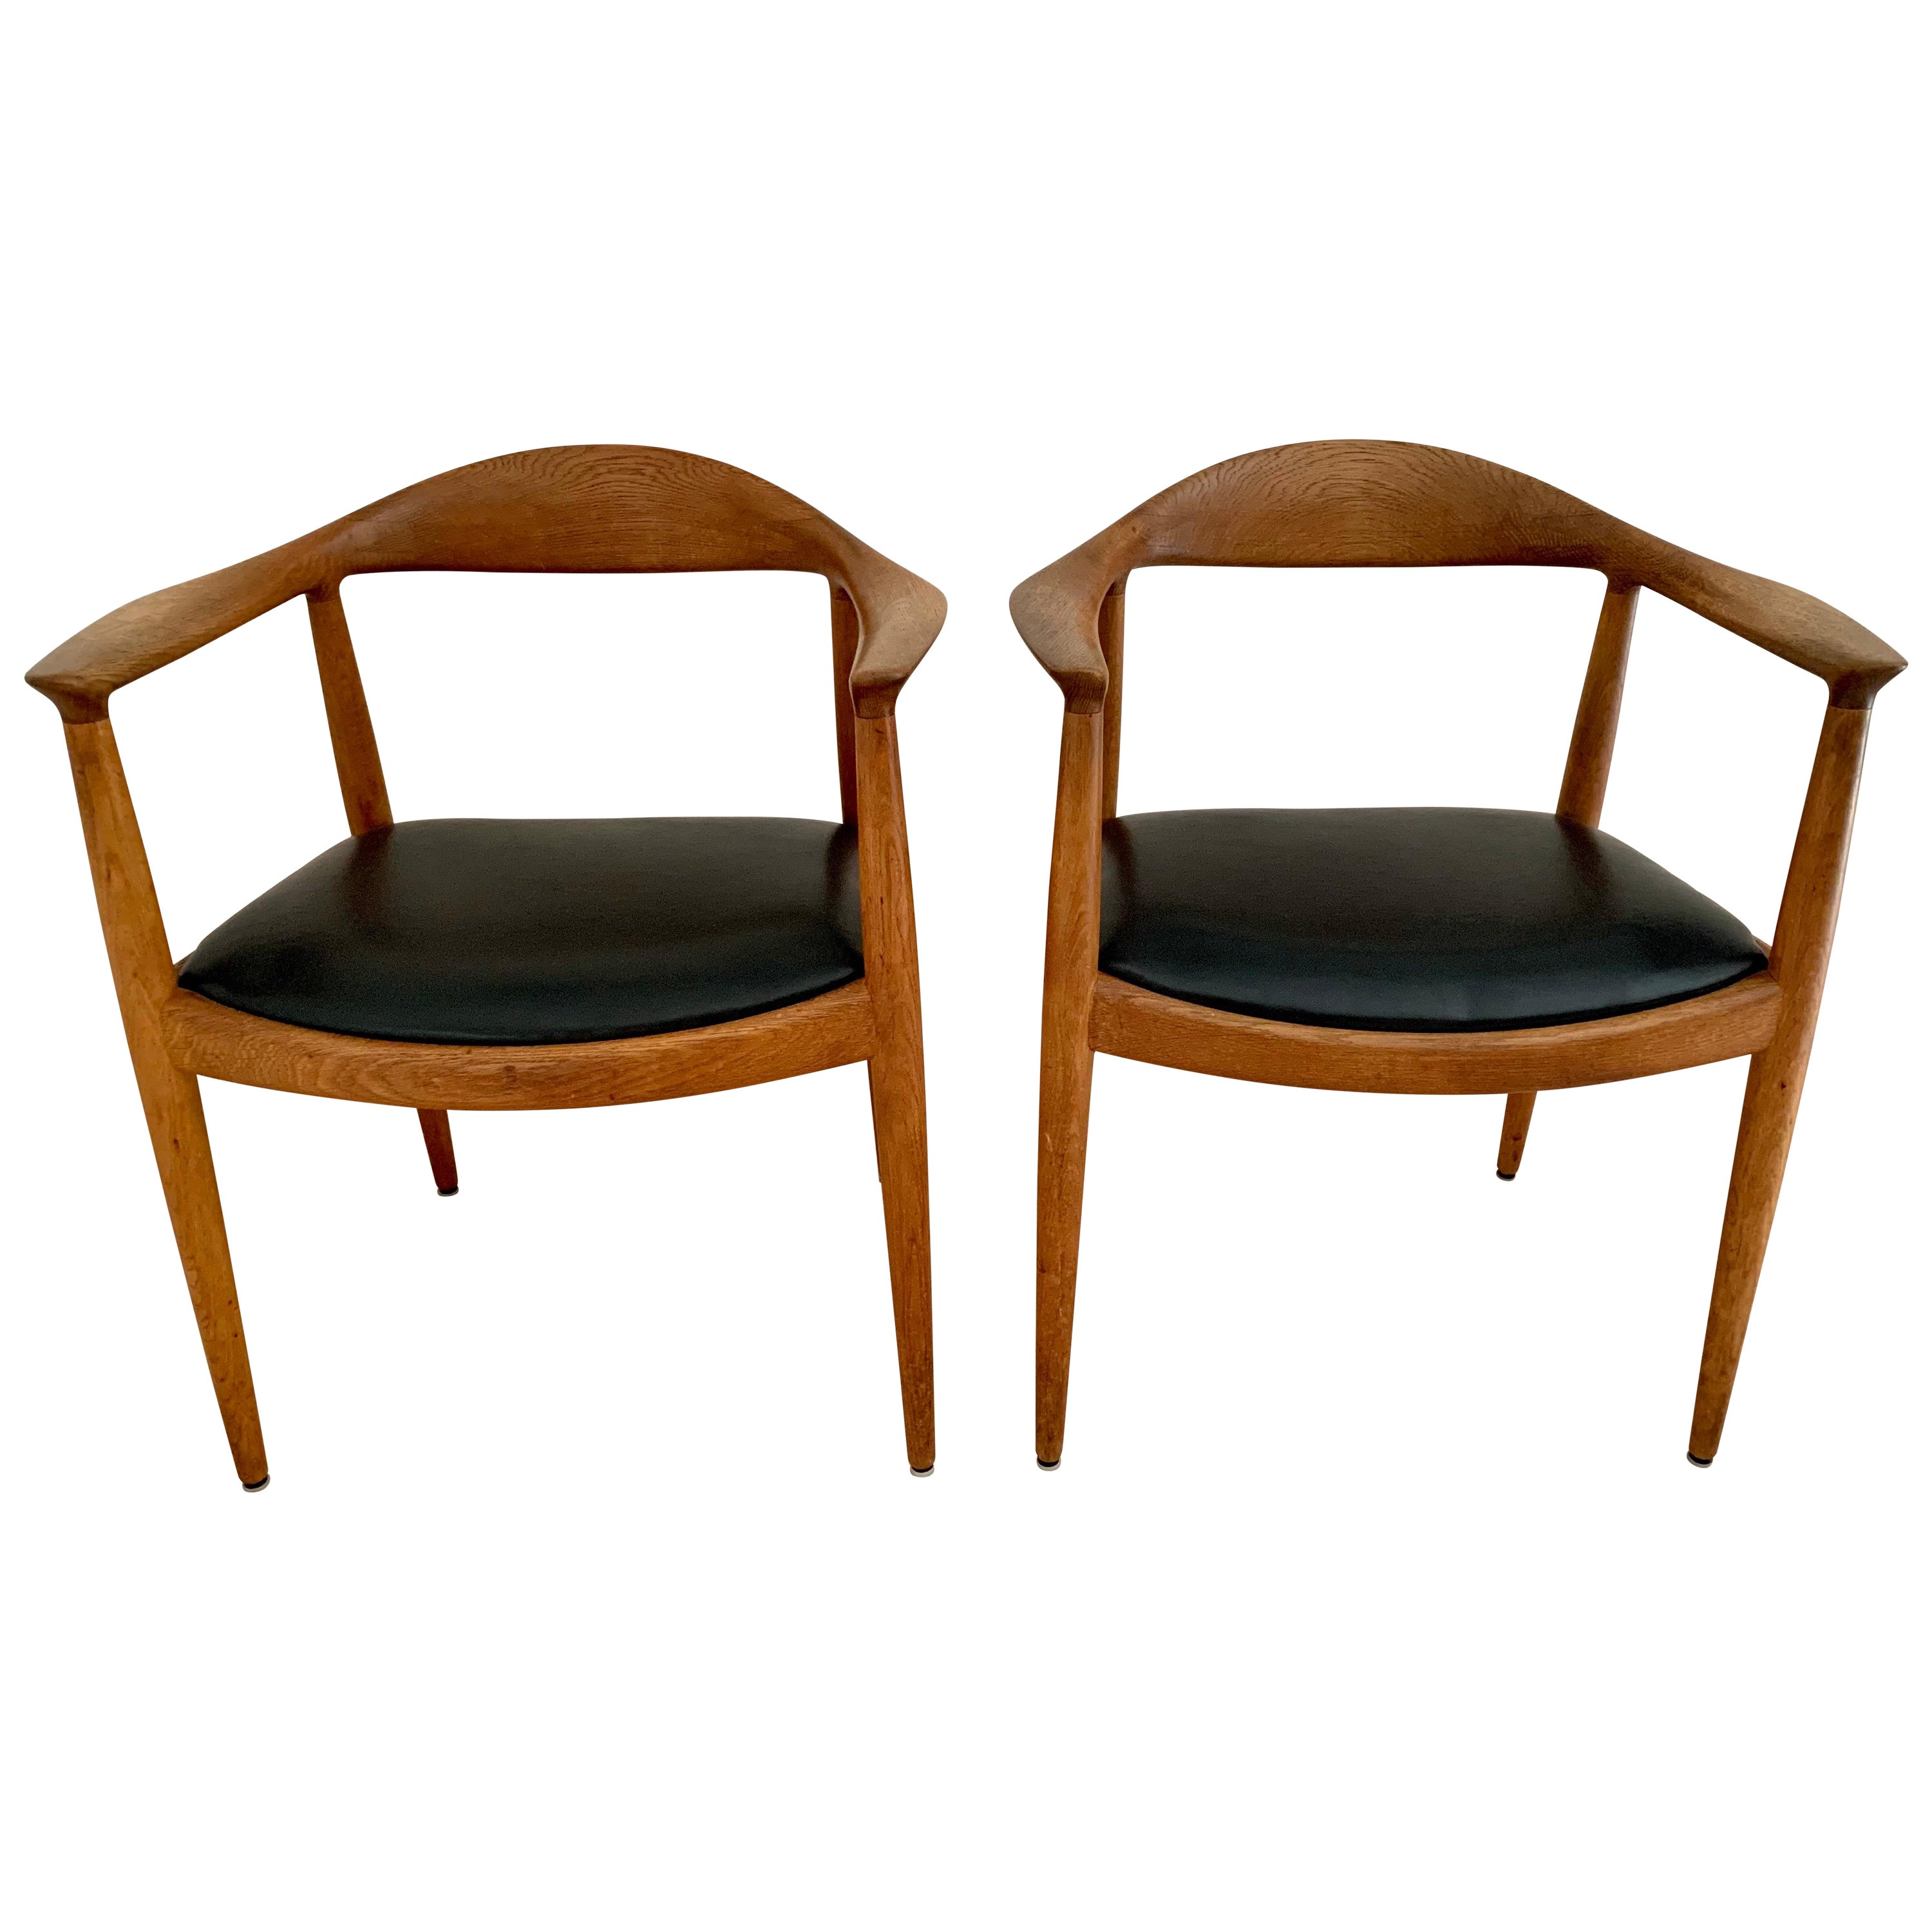 Signed Pair of Hans Wegner “The Chair” Round Chairs for Johannes Hansen